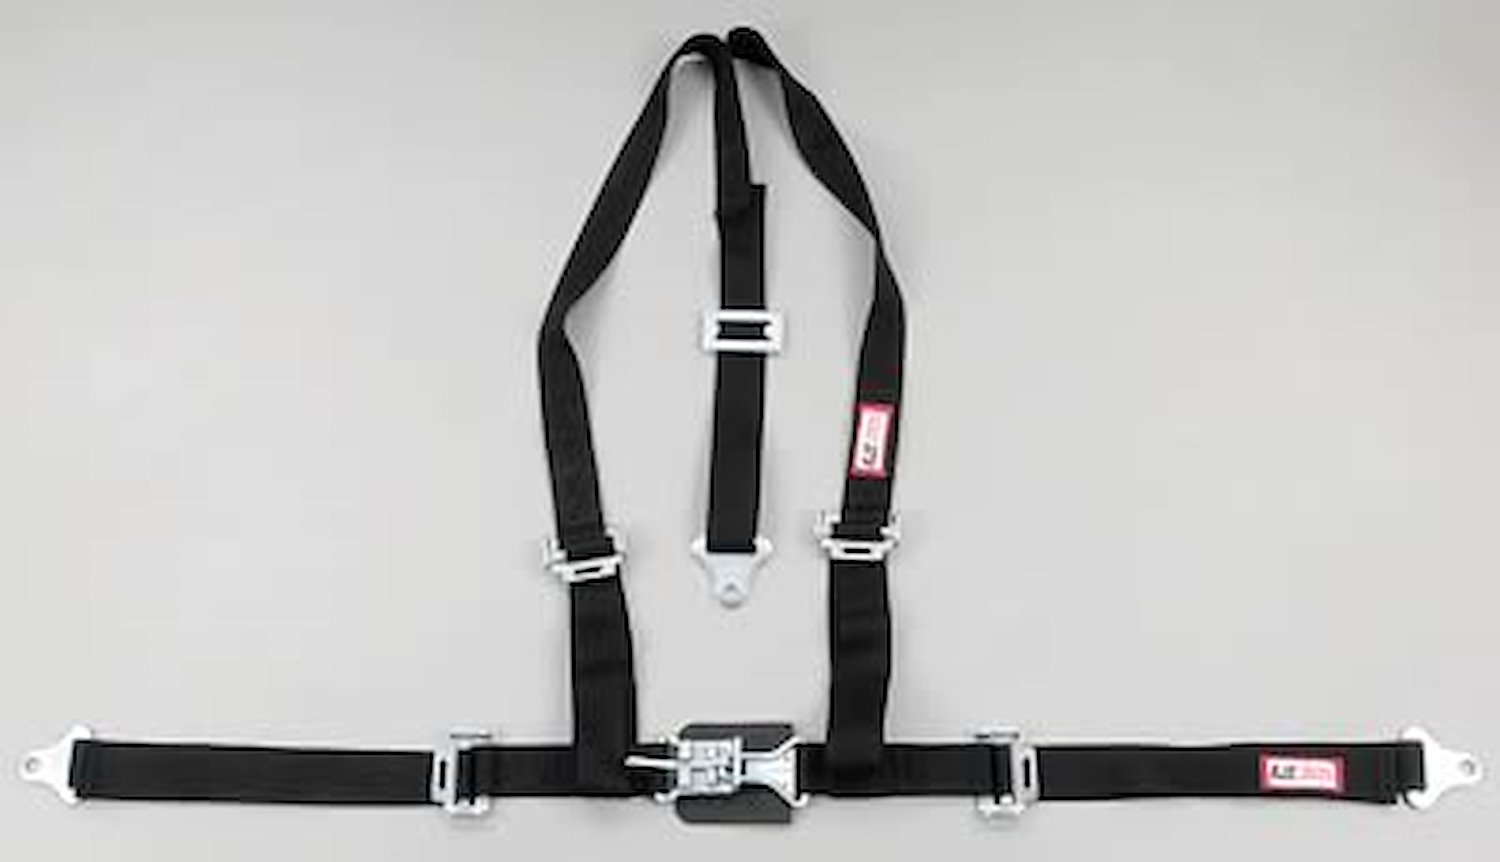 NON-SFI L&L HARNESS 3 PULL DOWN Lap Belt SEWN IN 2 S.H. Individual FLOOR Mount ALL WRAP ENDS ORANGE